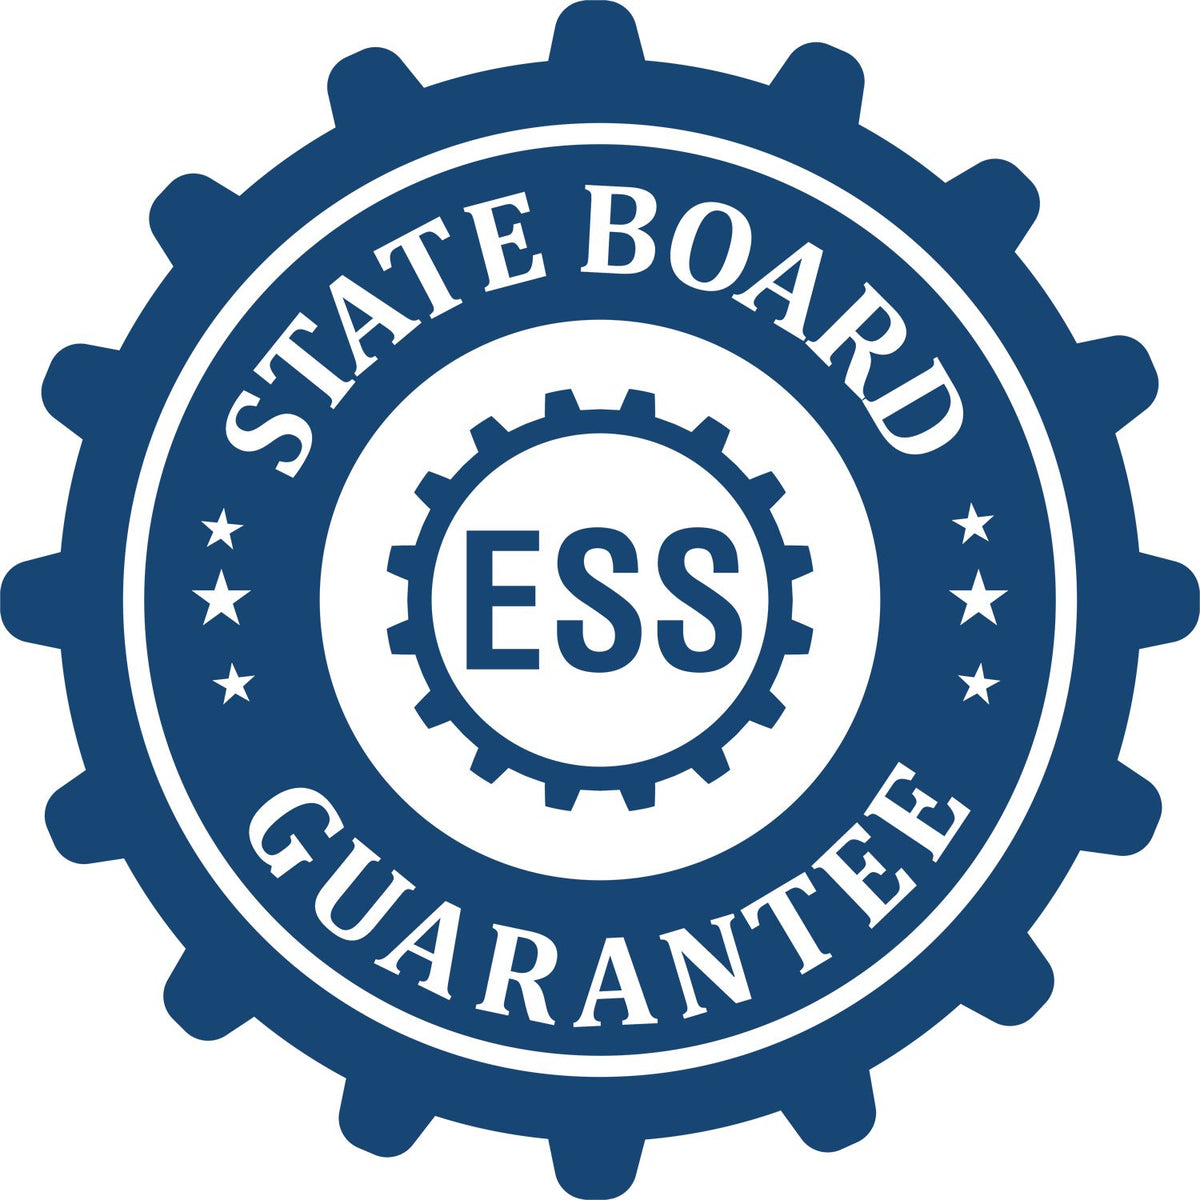 An emblem in a gear shape illustrating a state board guarantee for the Hybrid Nebraska Engineer Seal